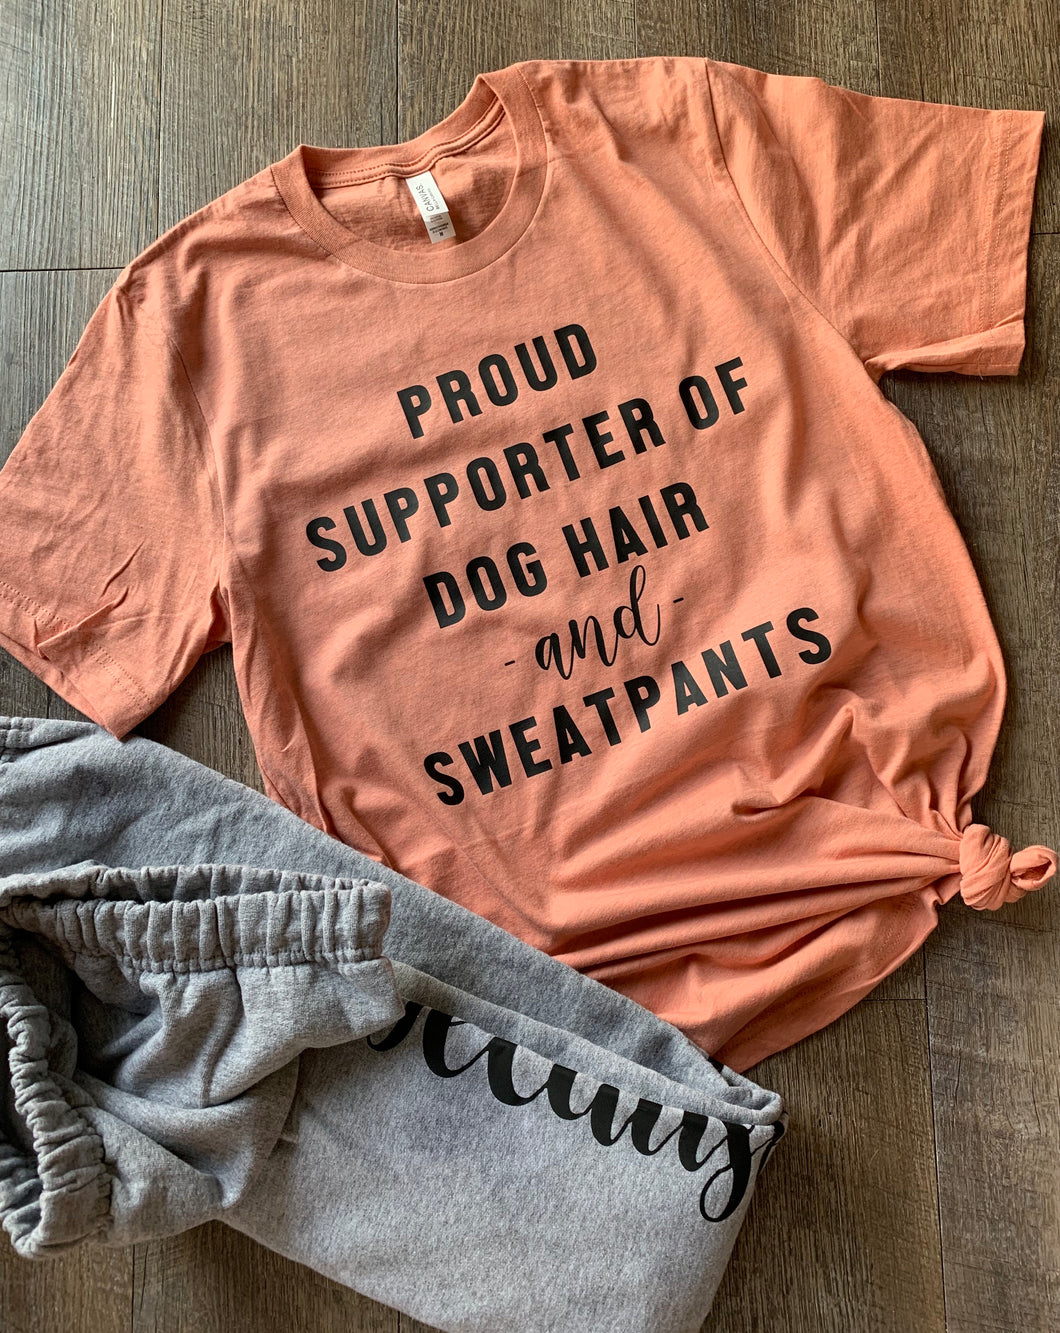 Proud supporter of dog hair and sweatpants. Funny dog mom graphic tee. Coral sunset. - Mavictoria Designs Hot Press Express